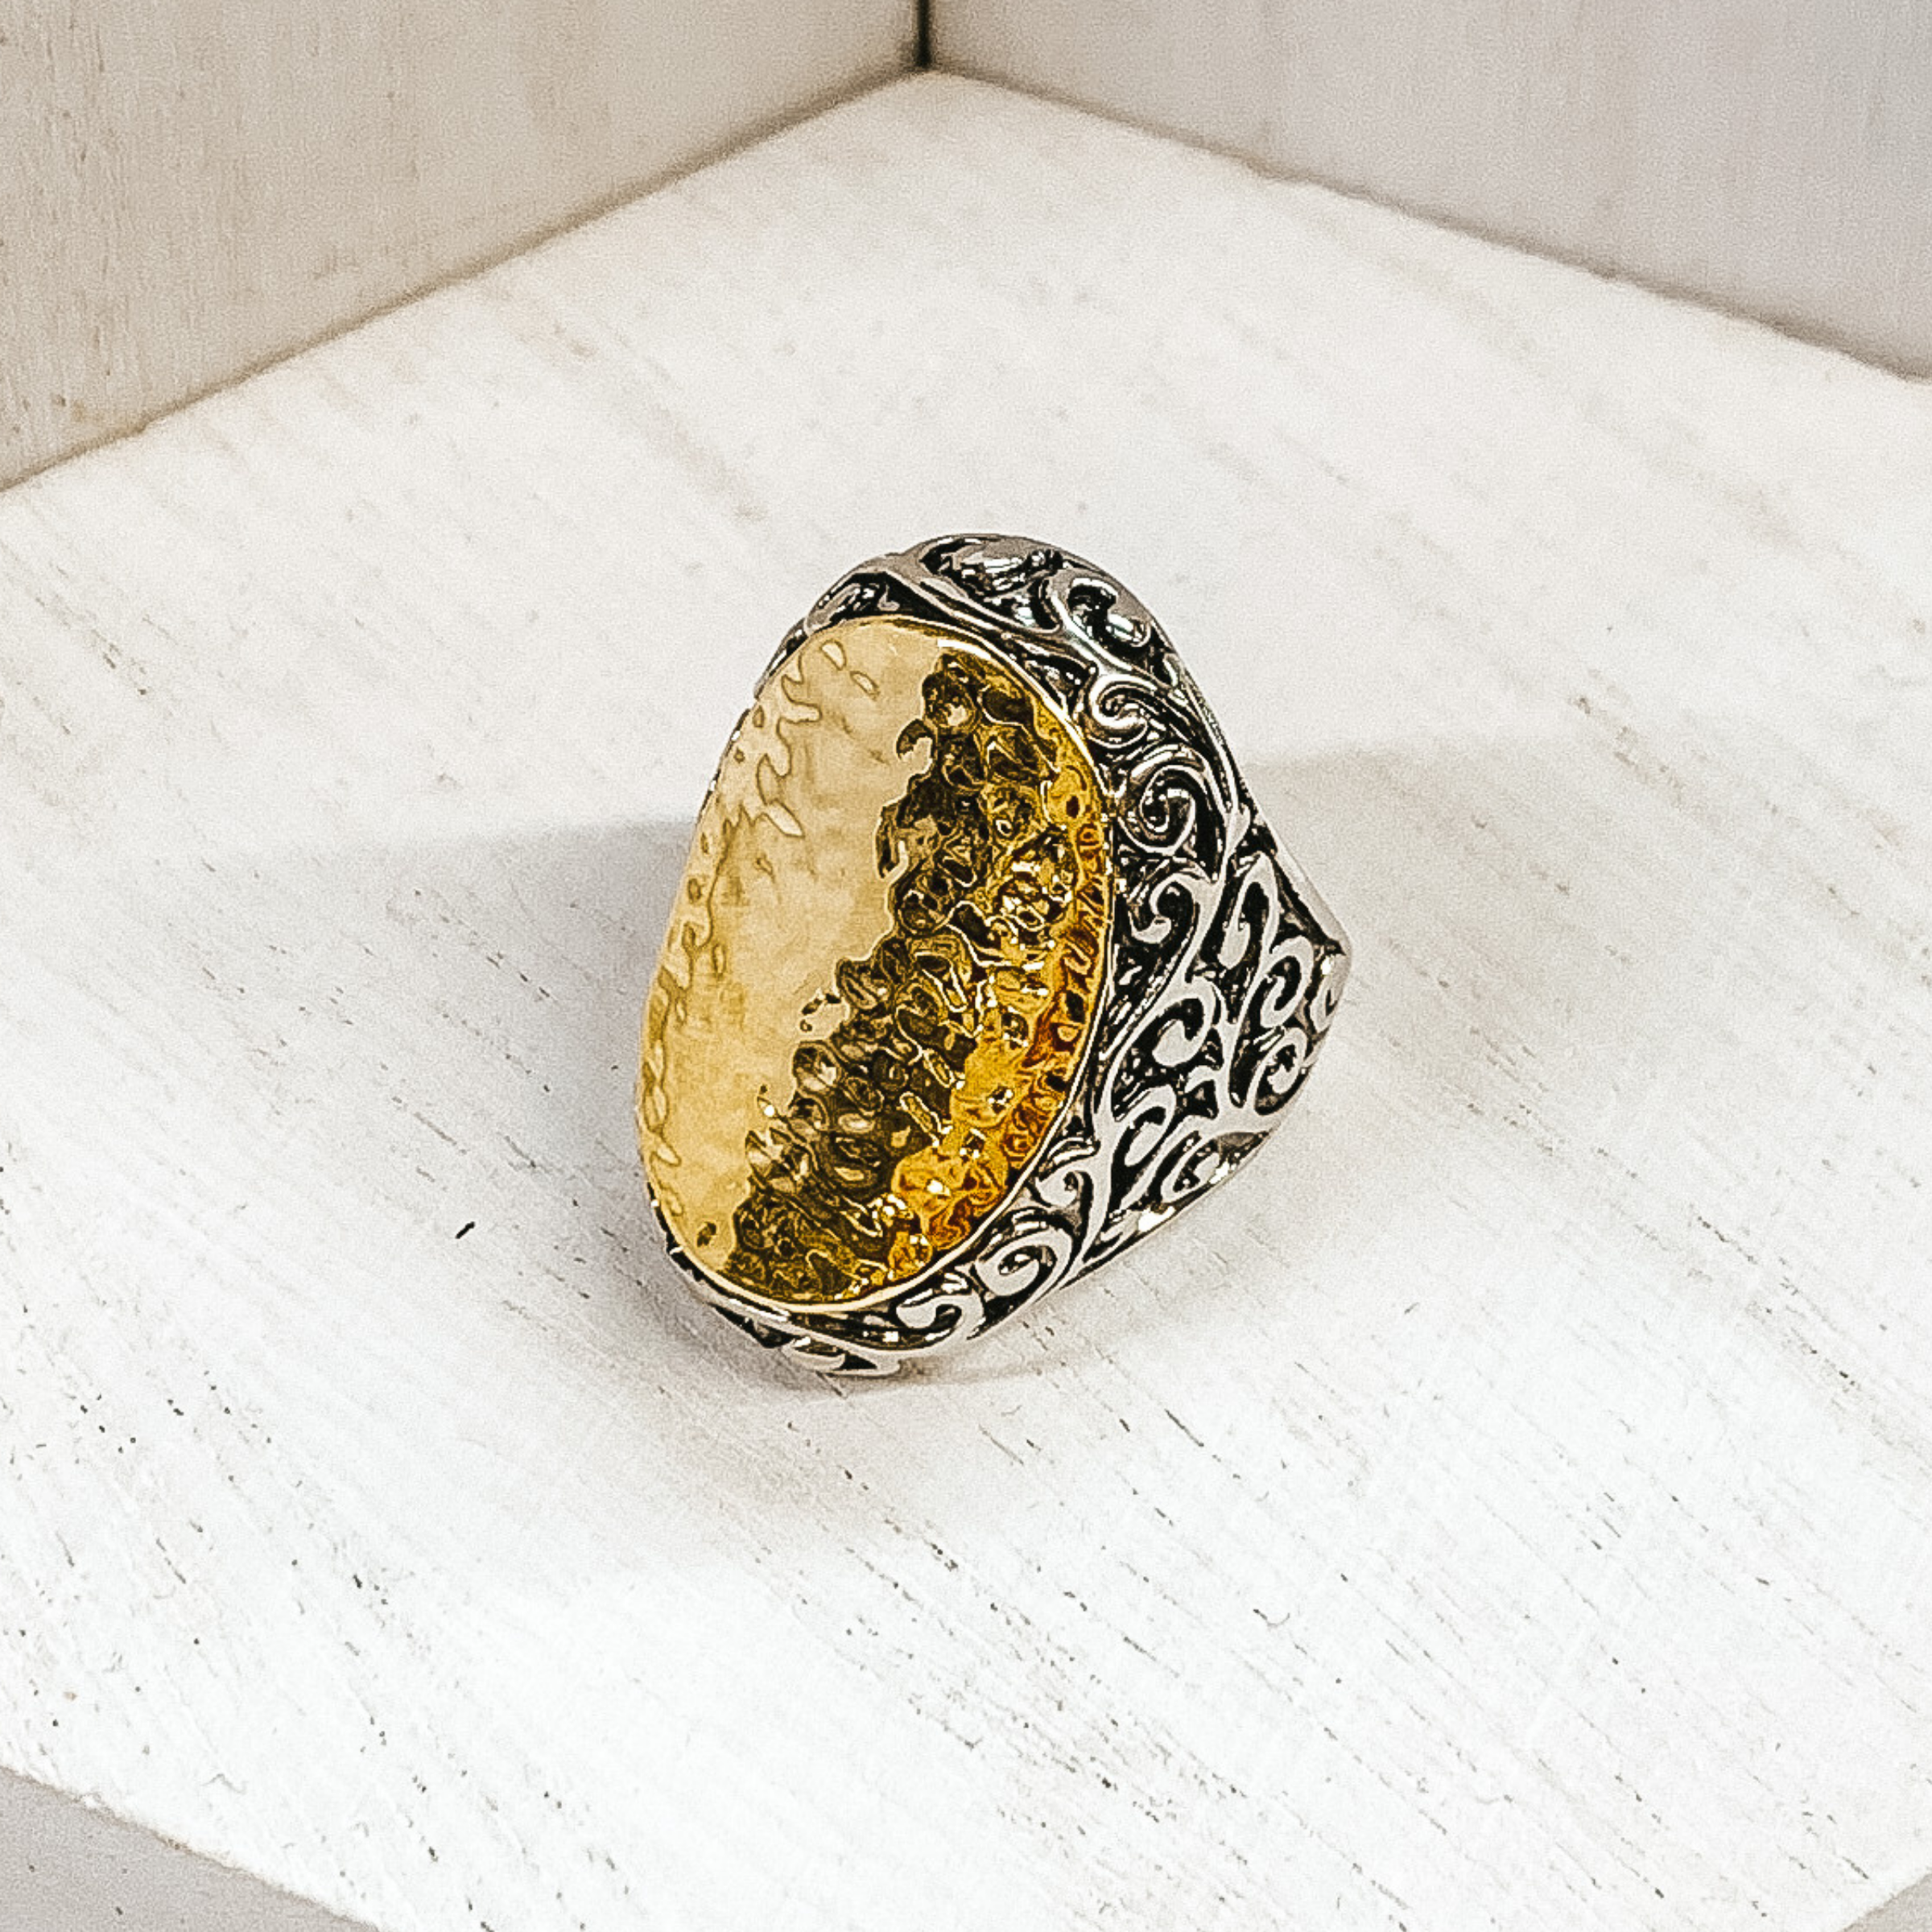 Large, silver engraved ring with a gold, hammered oval pendant in the center. This ring is pictured on a white background. 